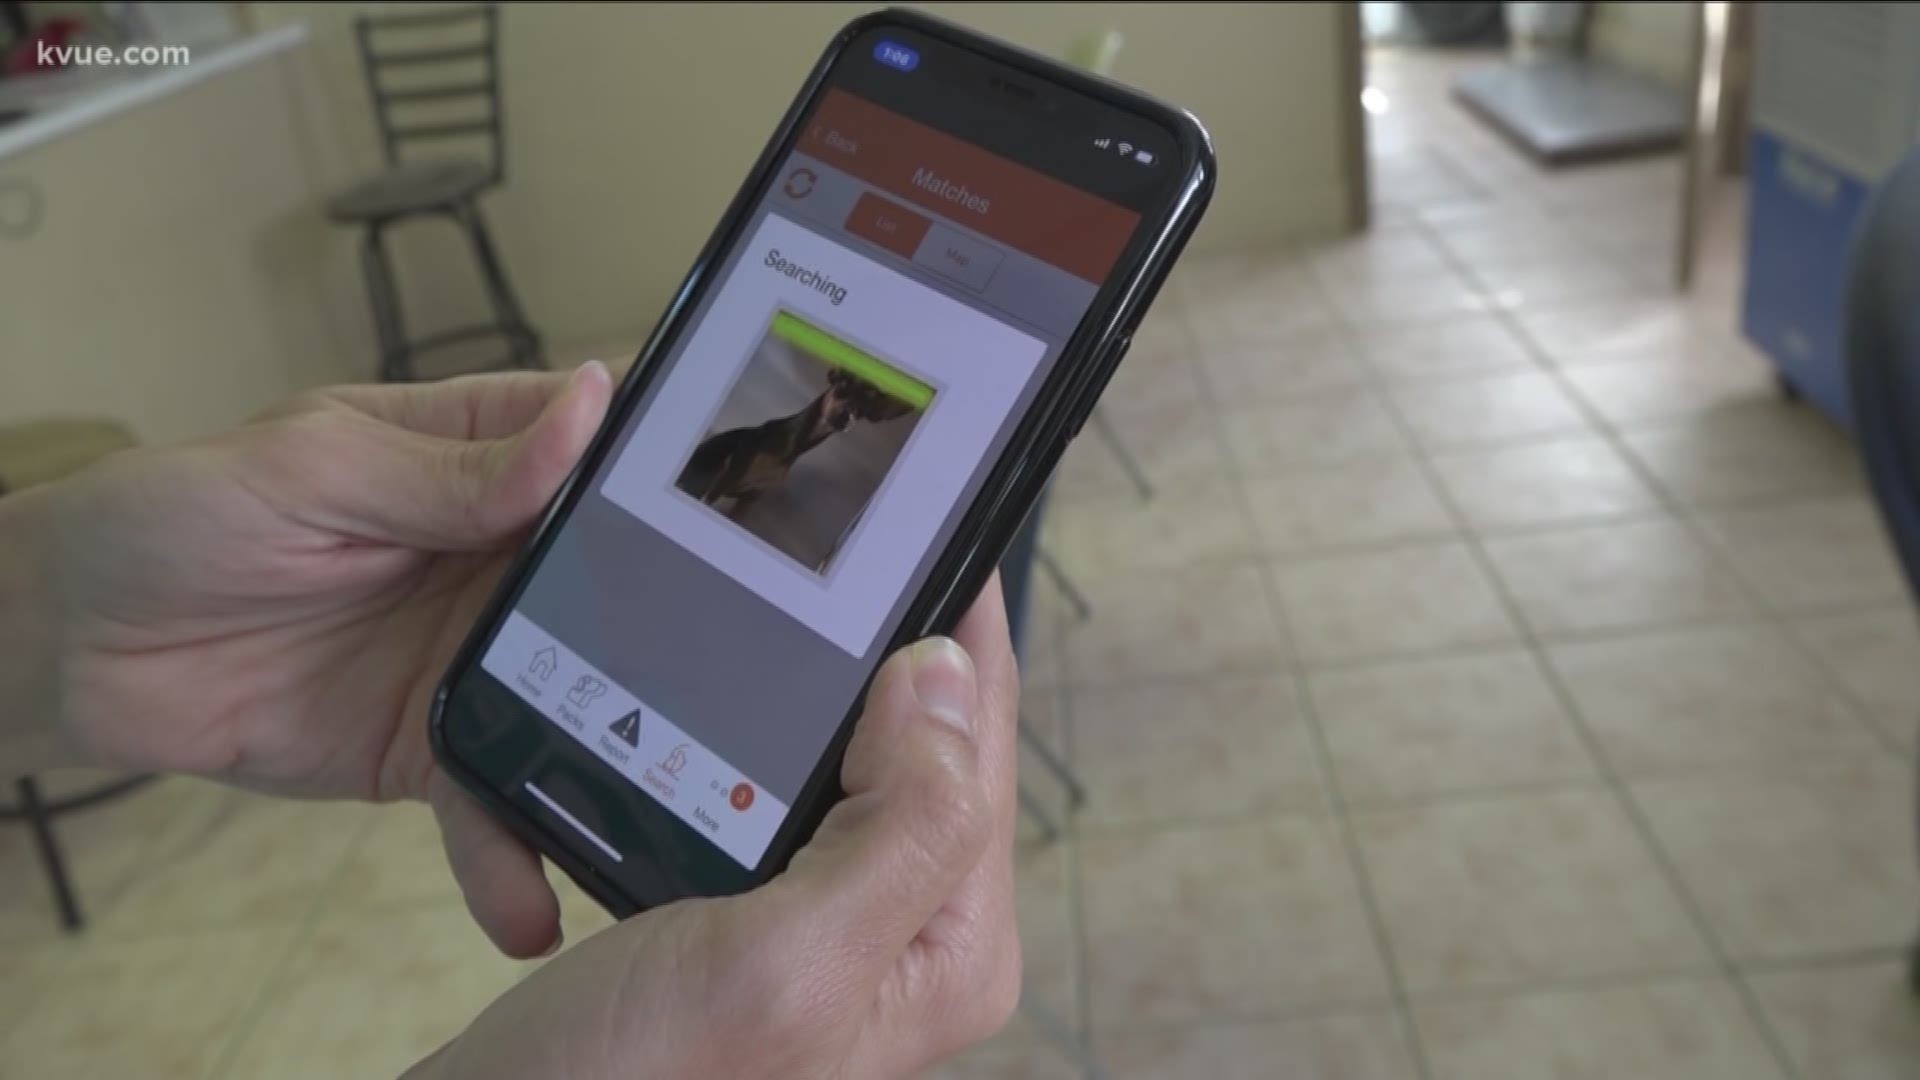 Losing a pet can be cause endless worry for an owner. Now Williamson County is using facial recognition technology to help reunite them.